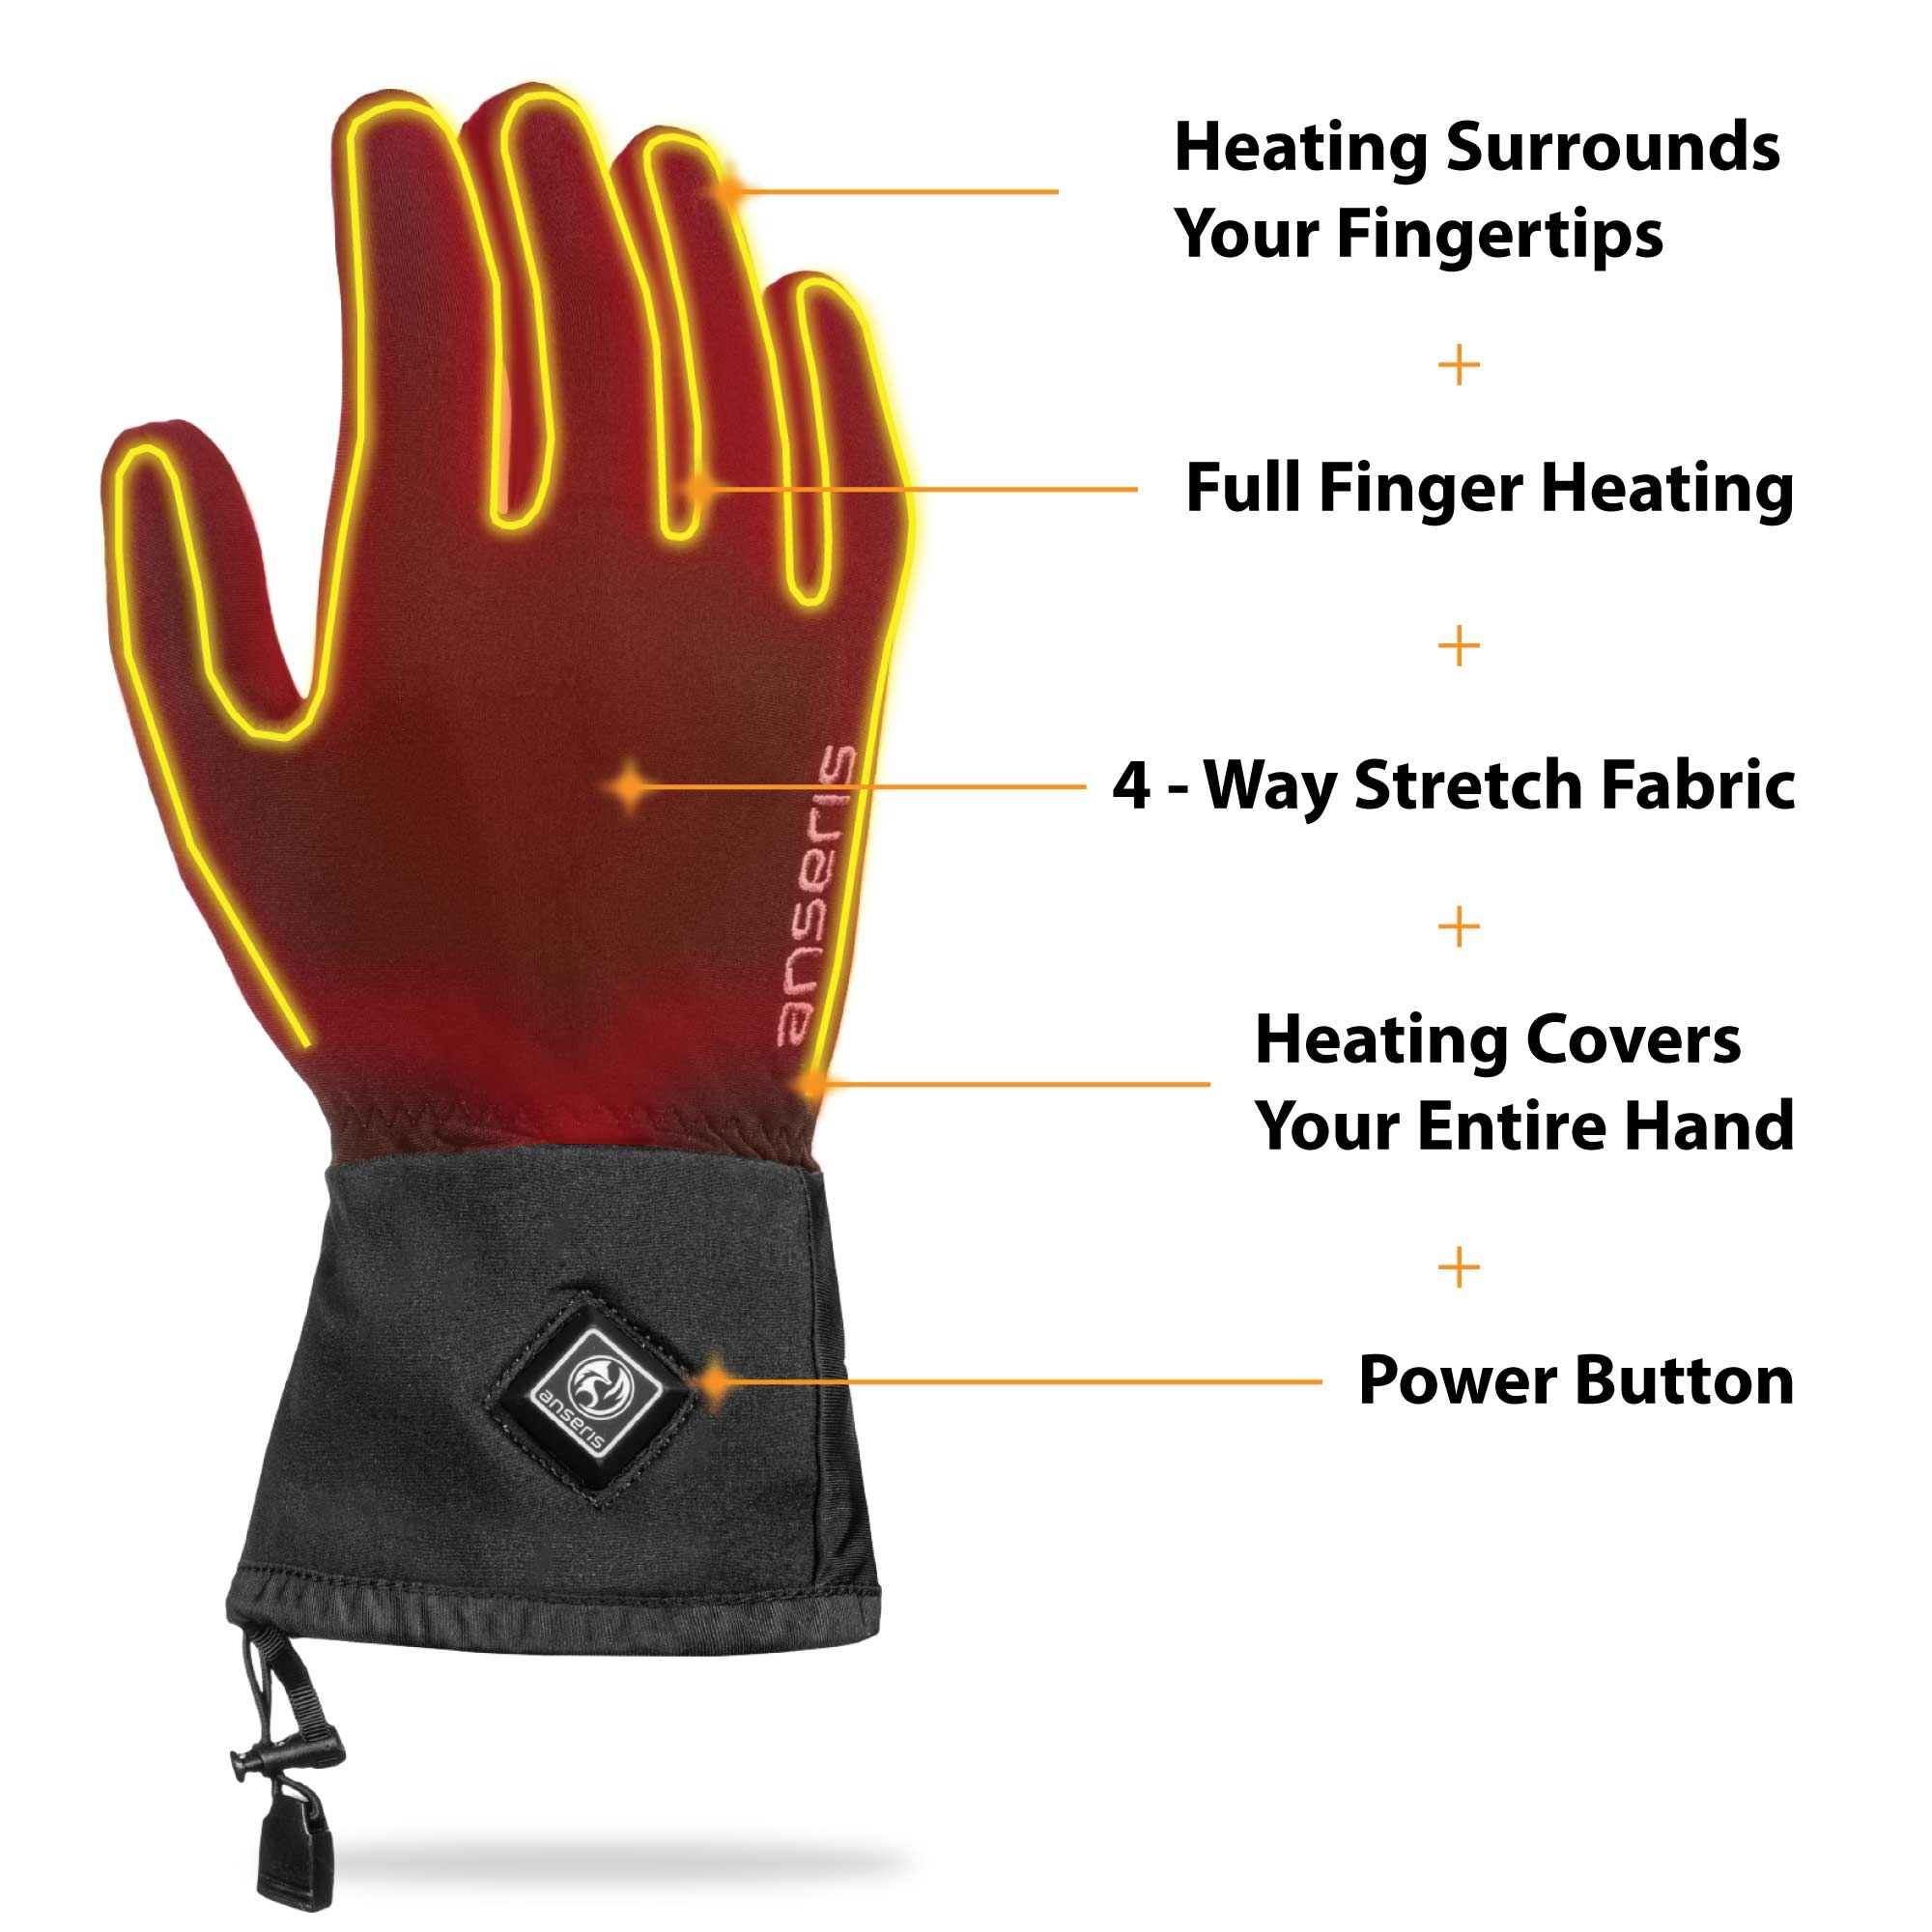 heated gloves feature full finger heating, 4 way stretch fabric a conveniently located power button with heat controls and adjustable wrist straps.